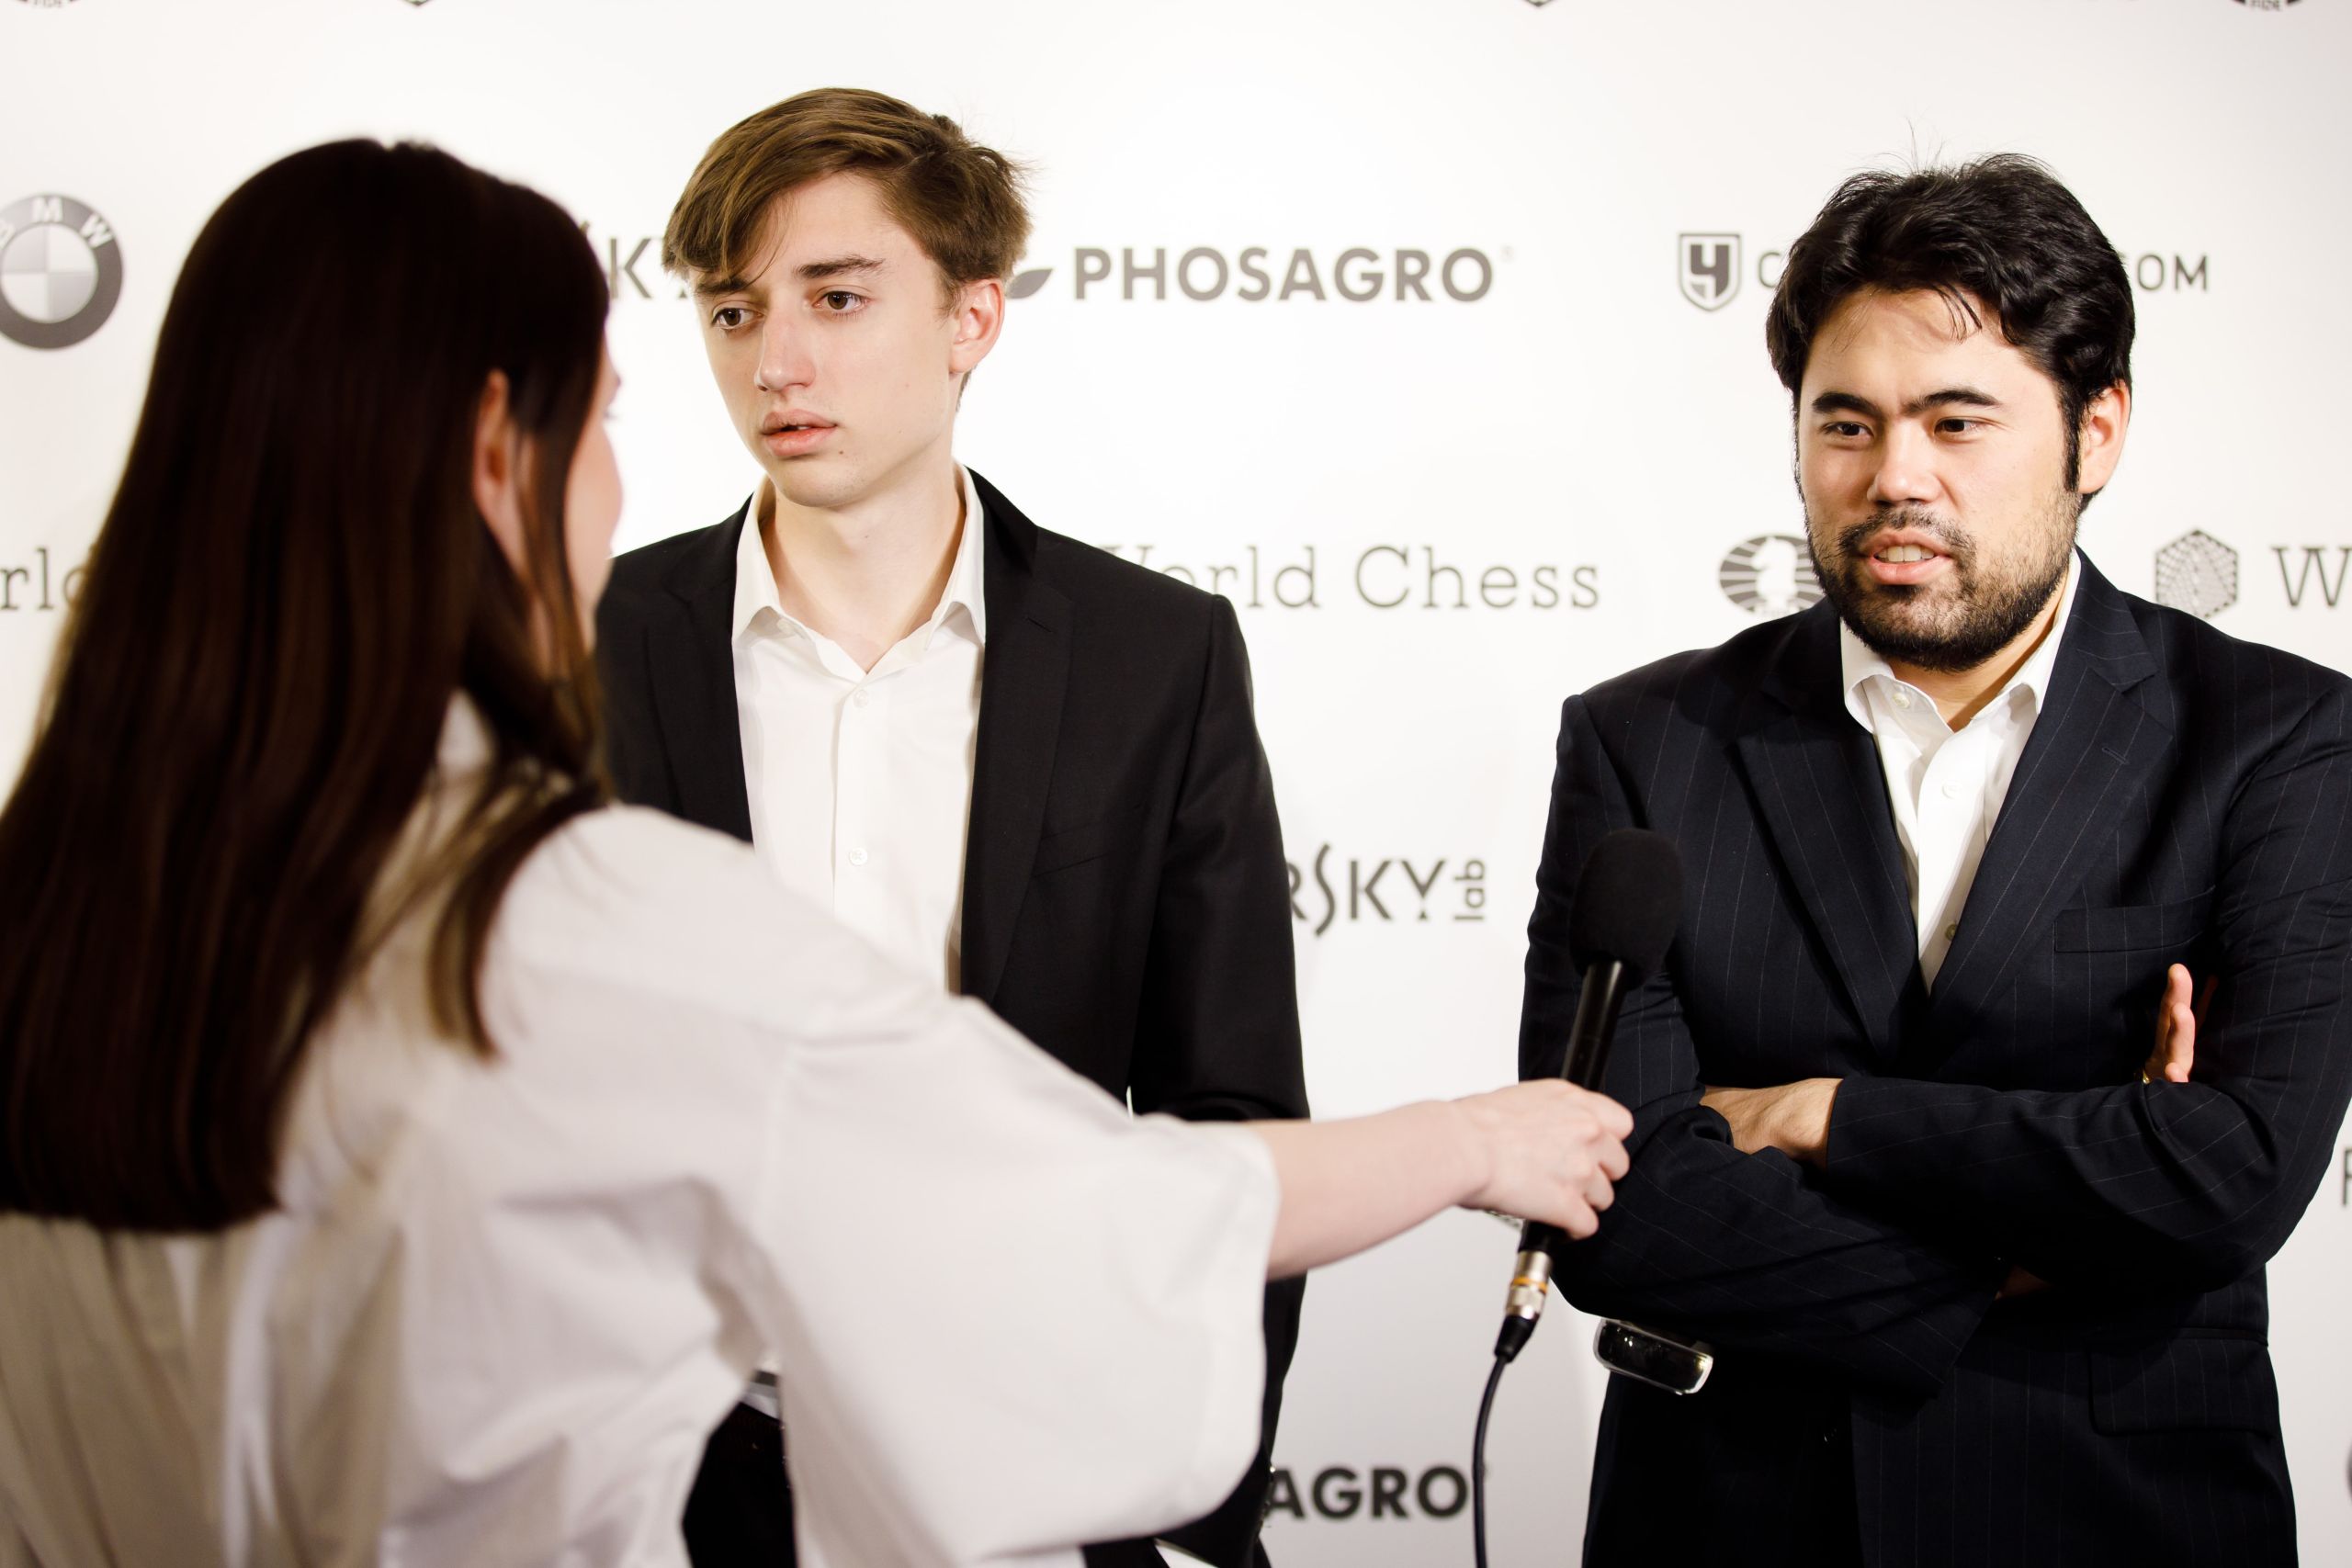 World Chess Nominates Daniil Dubov to the Grand Prix Series; Fears Mild  Outrage from Nepo's Fans : r/chess